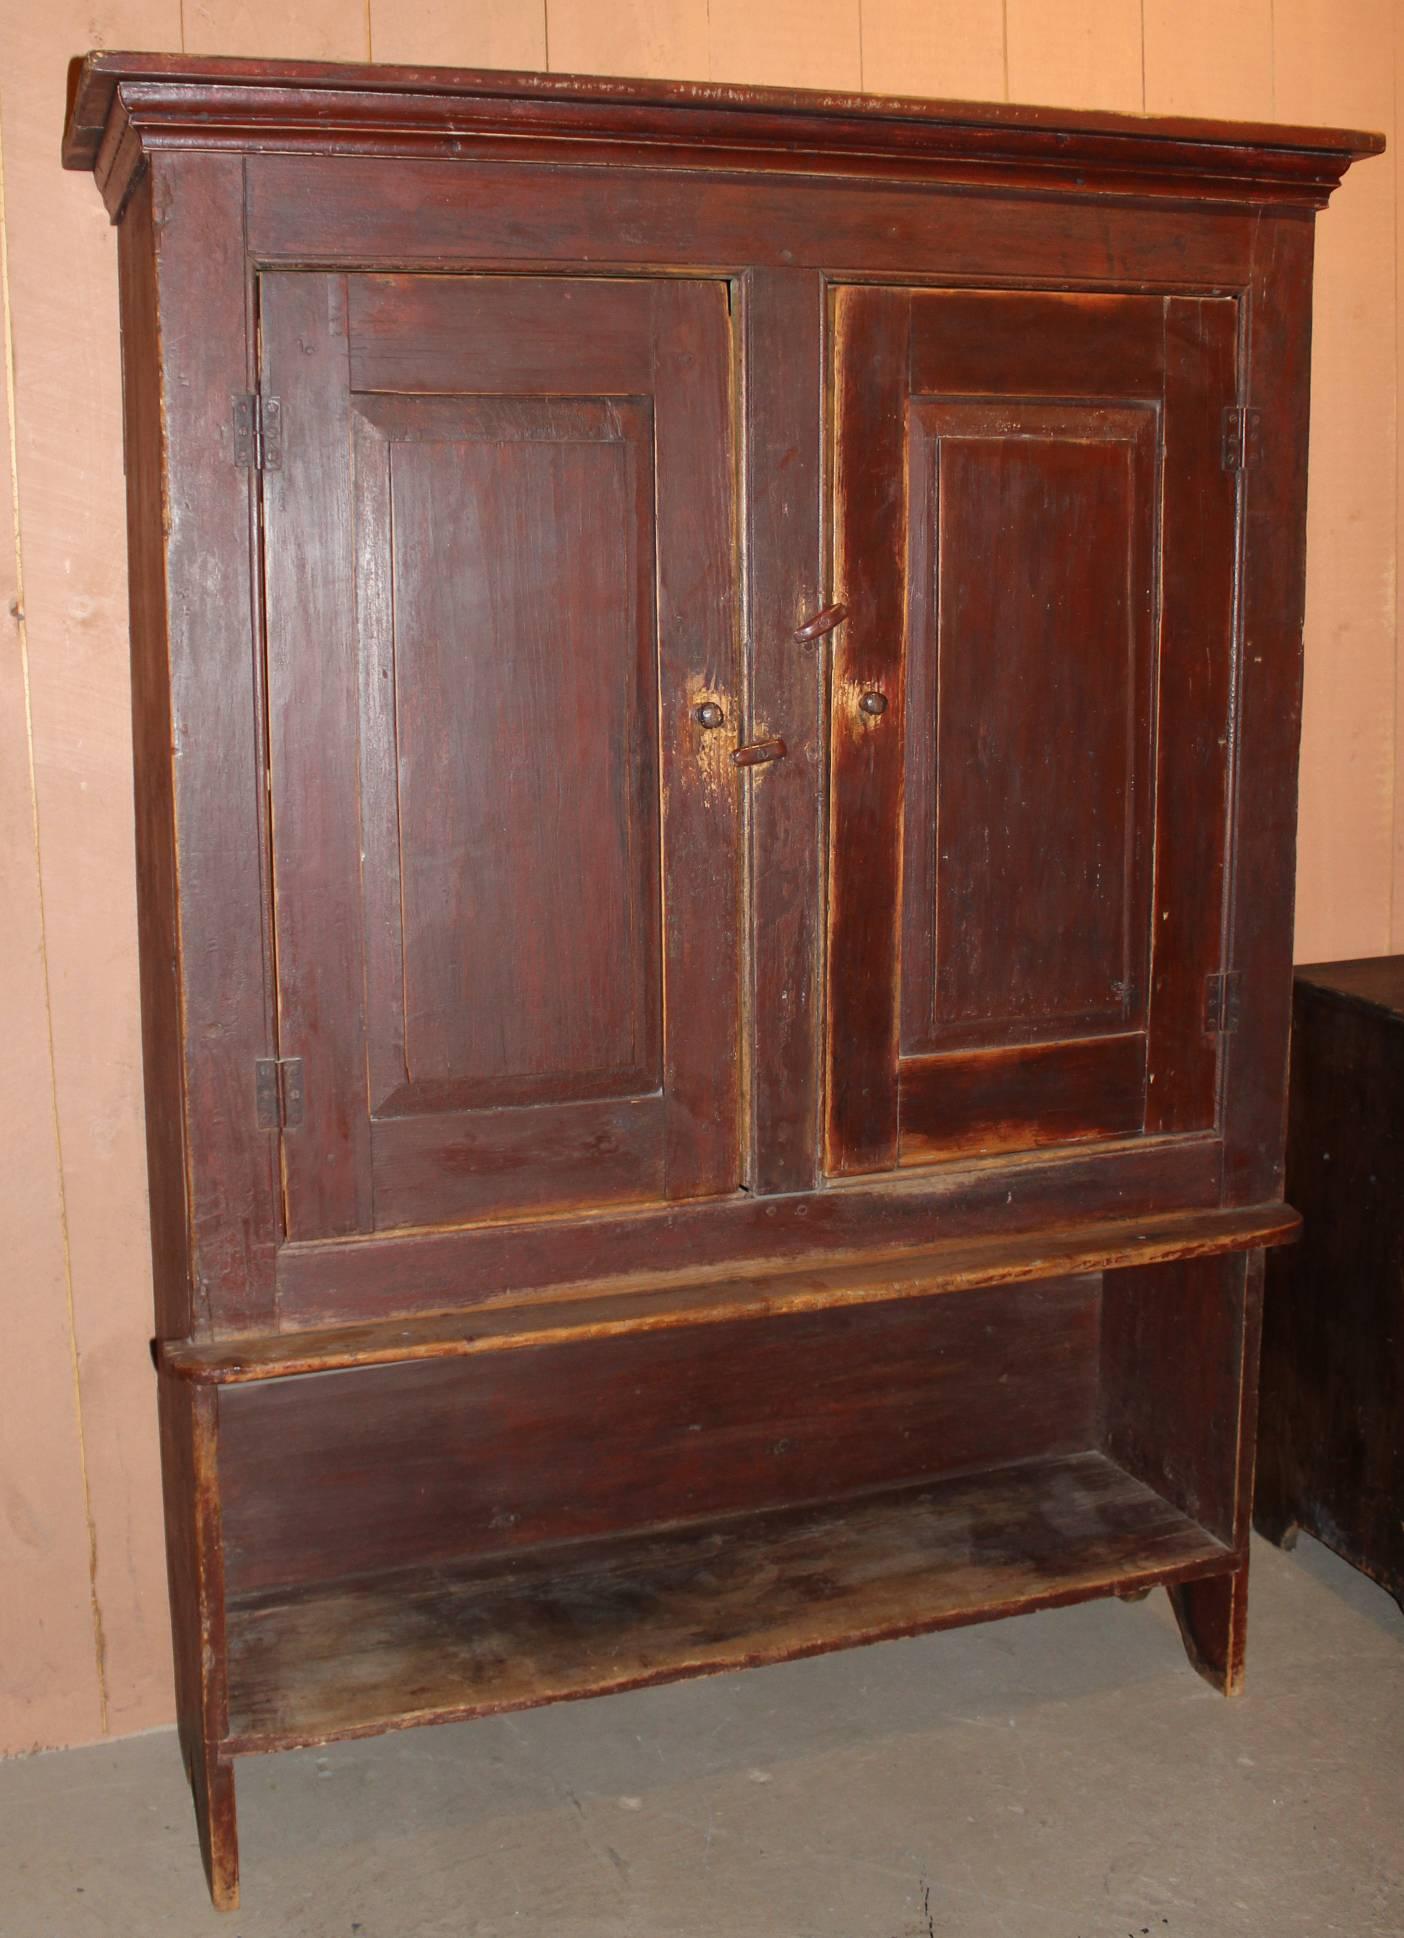 American Rare Primitive 19th Century Hutch Cupboard with Blind or Paneled Doors